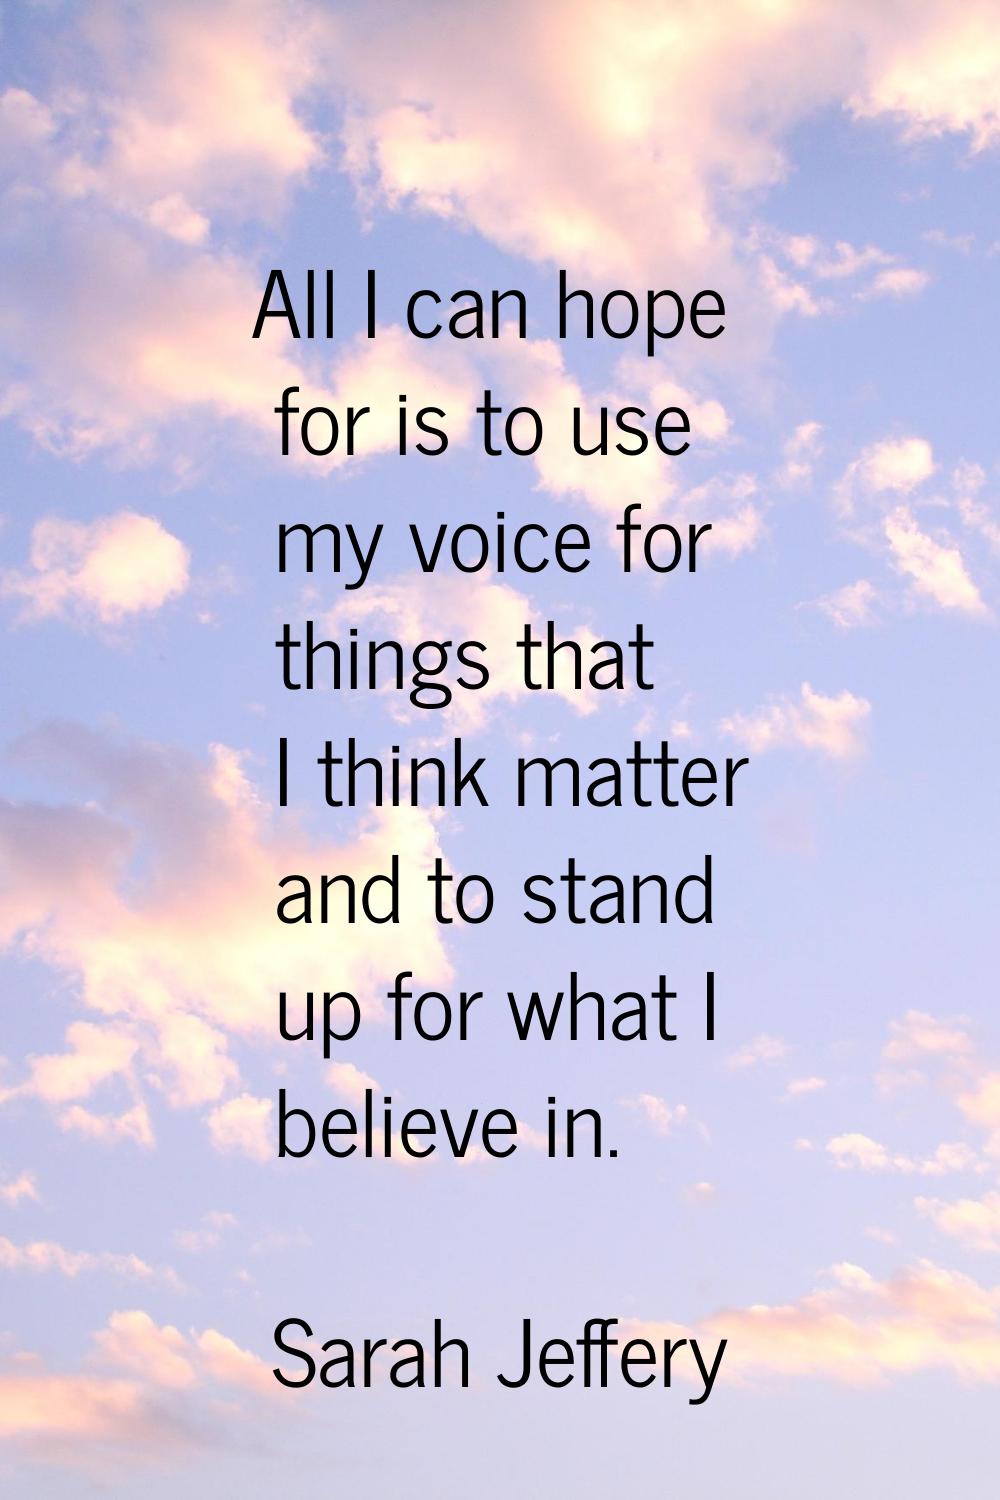 All I can hope for is to use my voice for things that I think matter and to stand up for what I bel